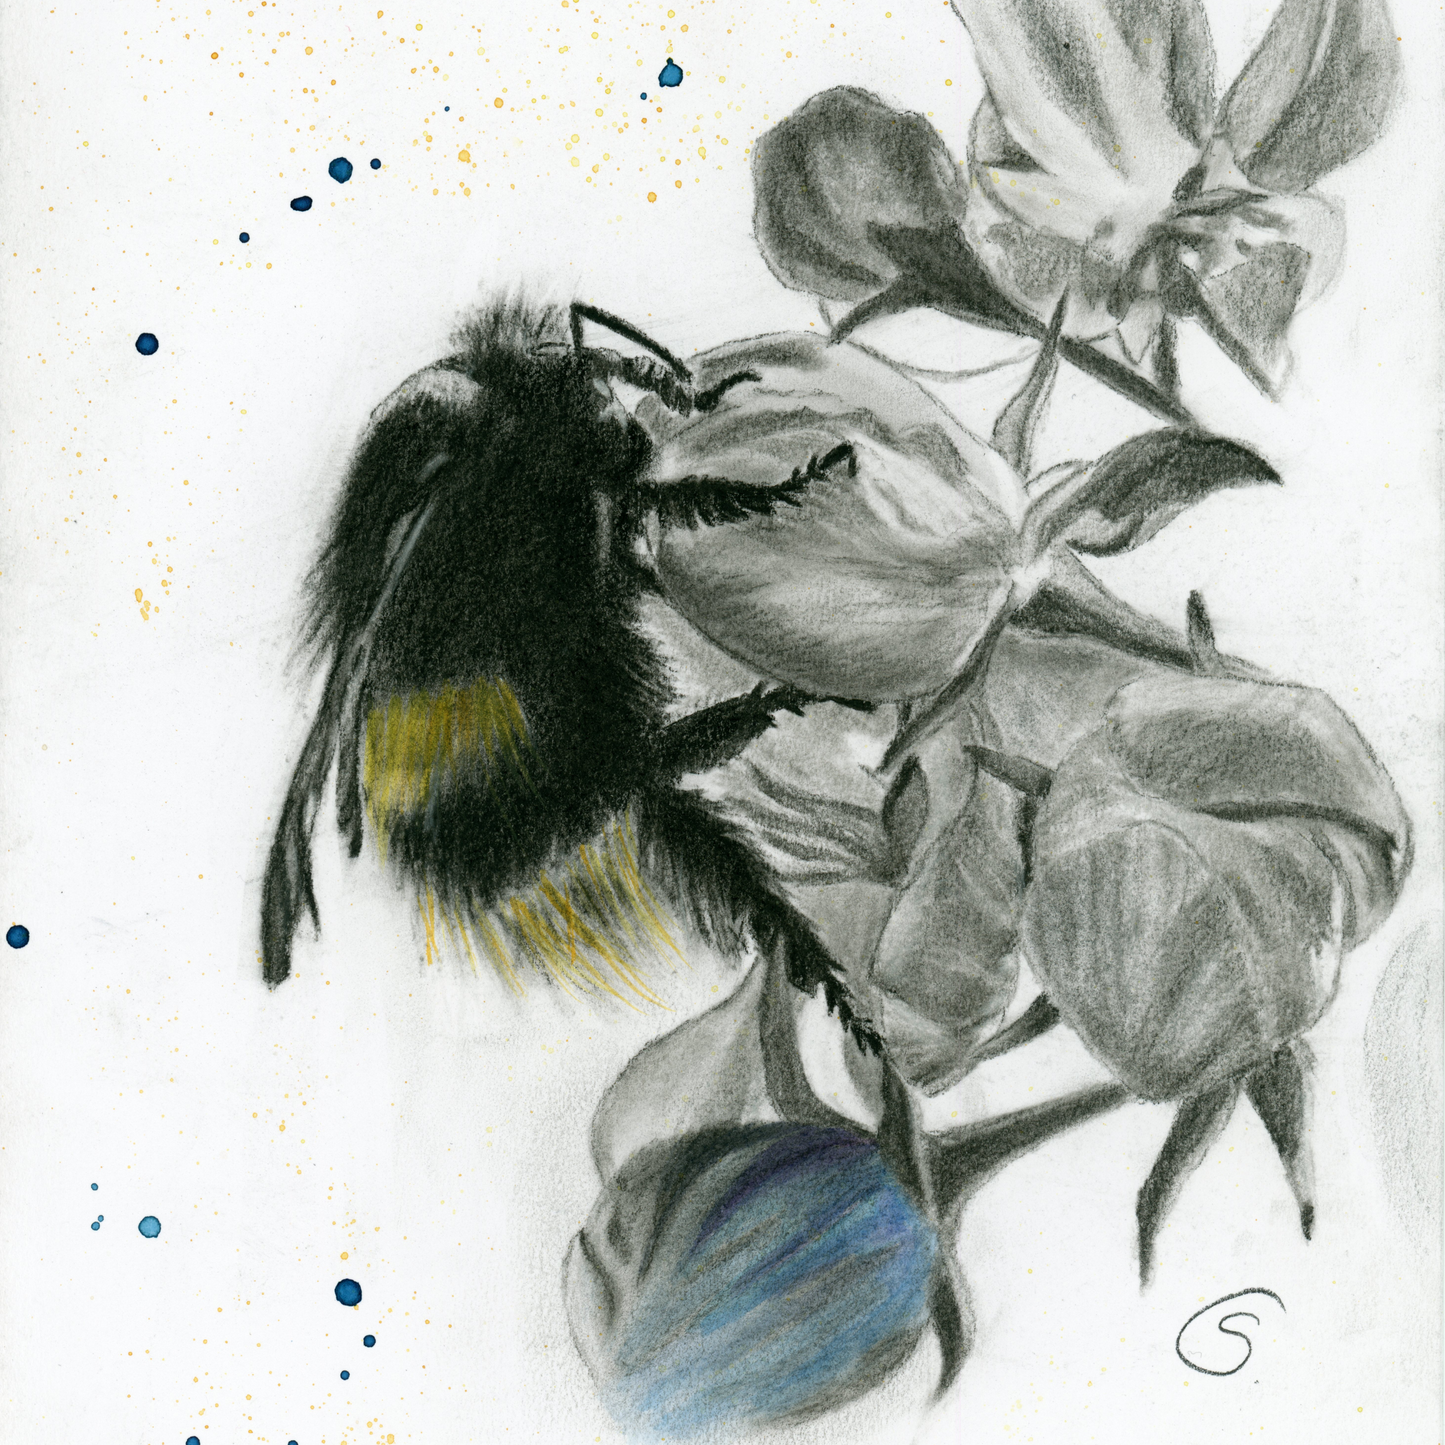 "An enchanting charcoal drawing of a whimsical bee surrounded by delicate blossoms, with light watercolor highlights. The artwork is beautifully detailed and rendered on 200 gsm acid-free paper, sized A4 (8.3" x 11.7"), and is unframed. A captivating celebration of nature's beauty."